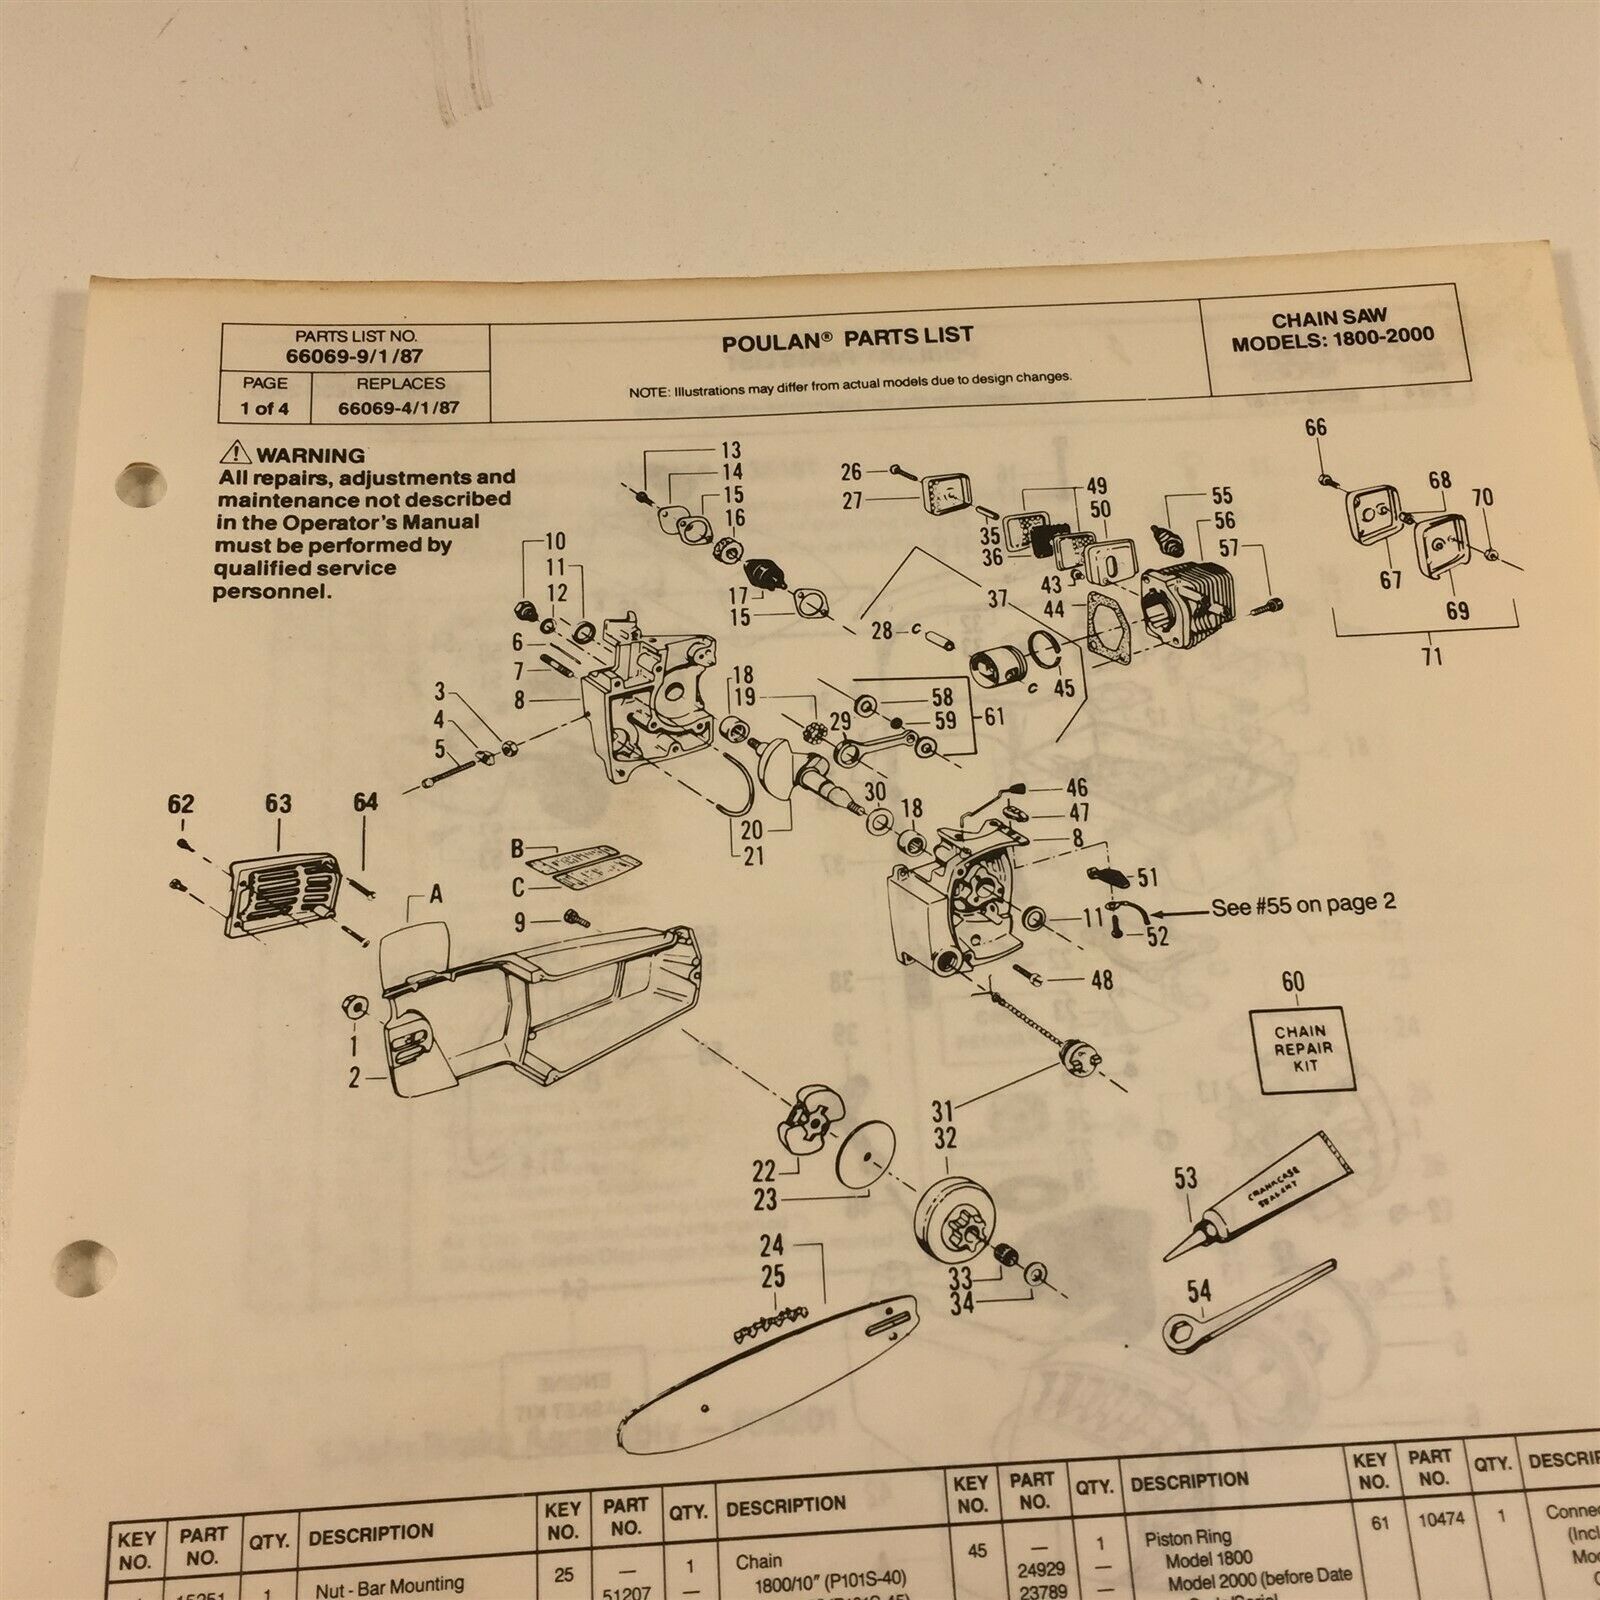 Primary image for 1987 Poulan Models 1800-2000 Chain Saw Parts List 66069